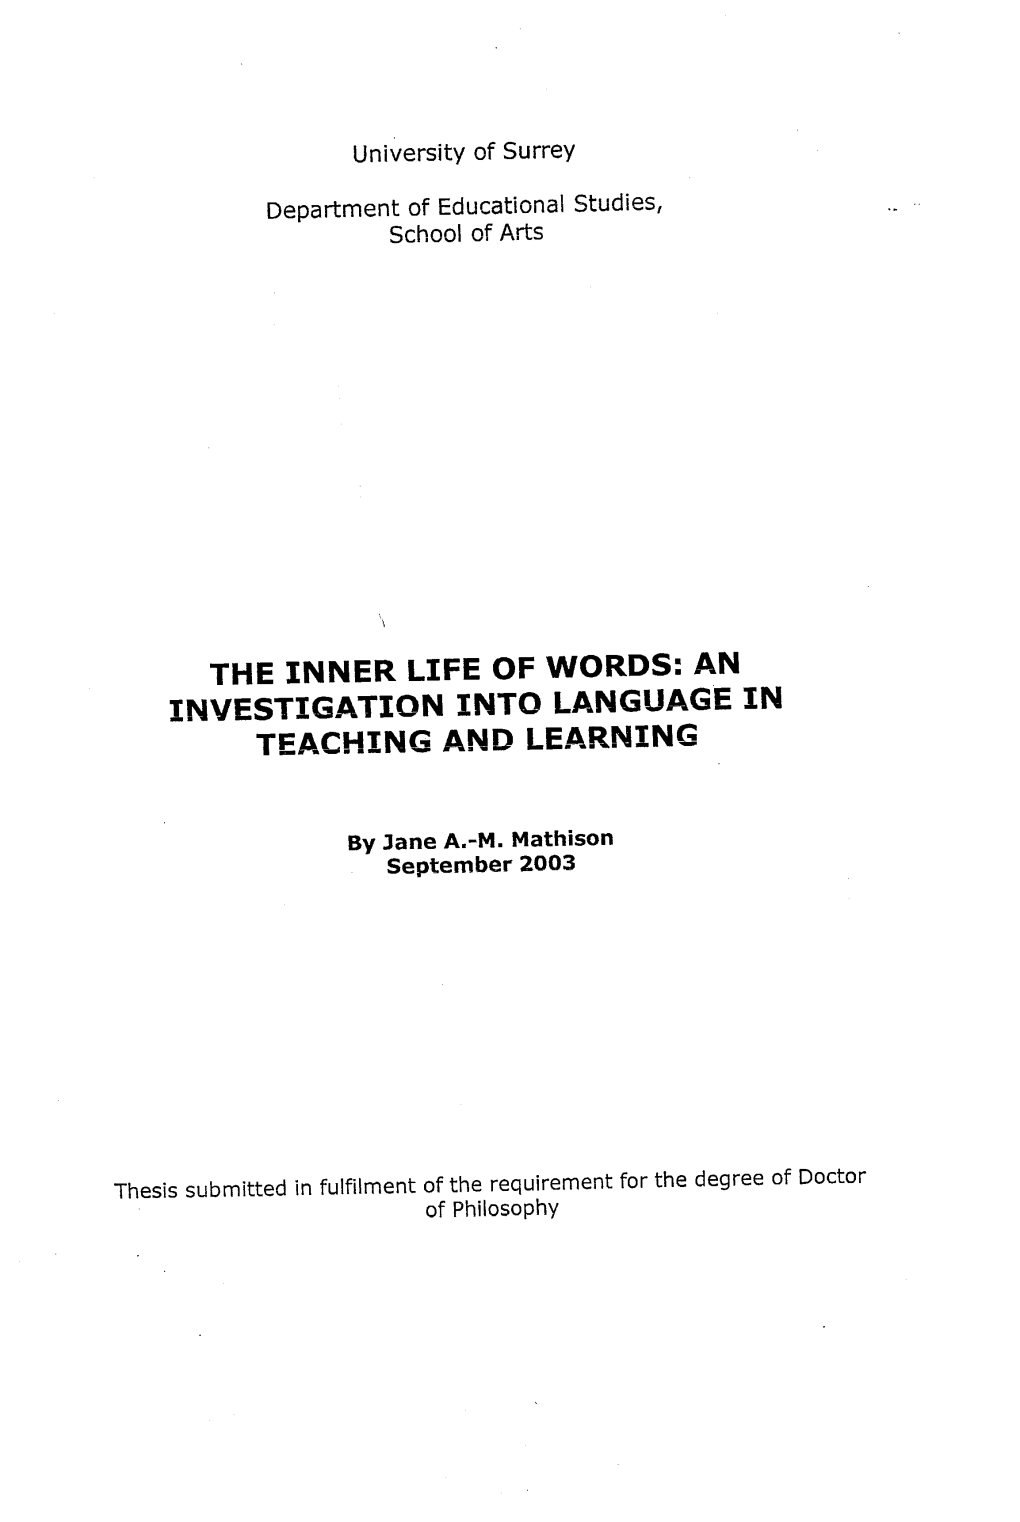 The Inner Life of Words: an Investigation Into Language in Teaching and Learning